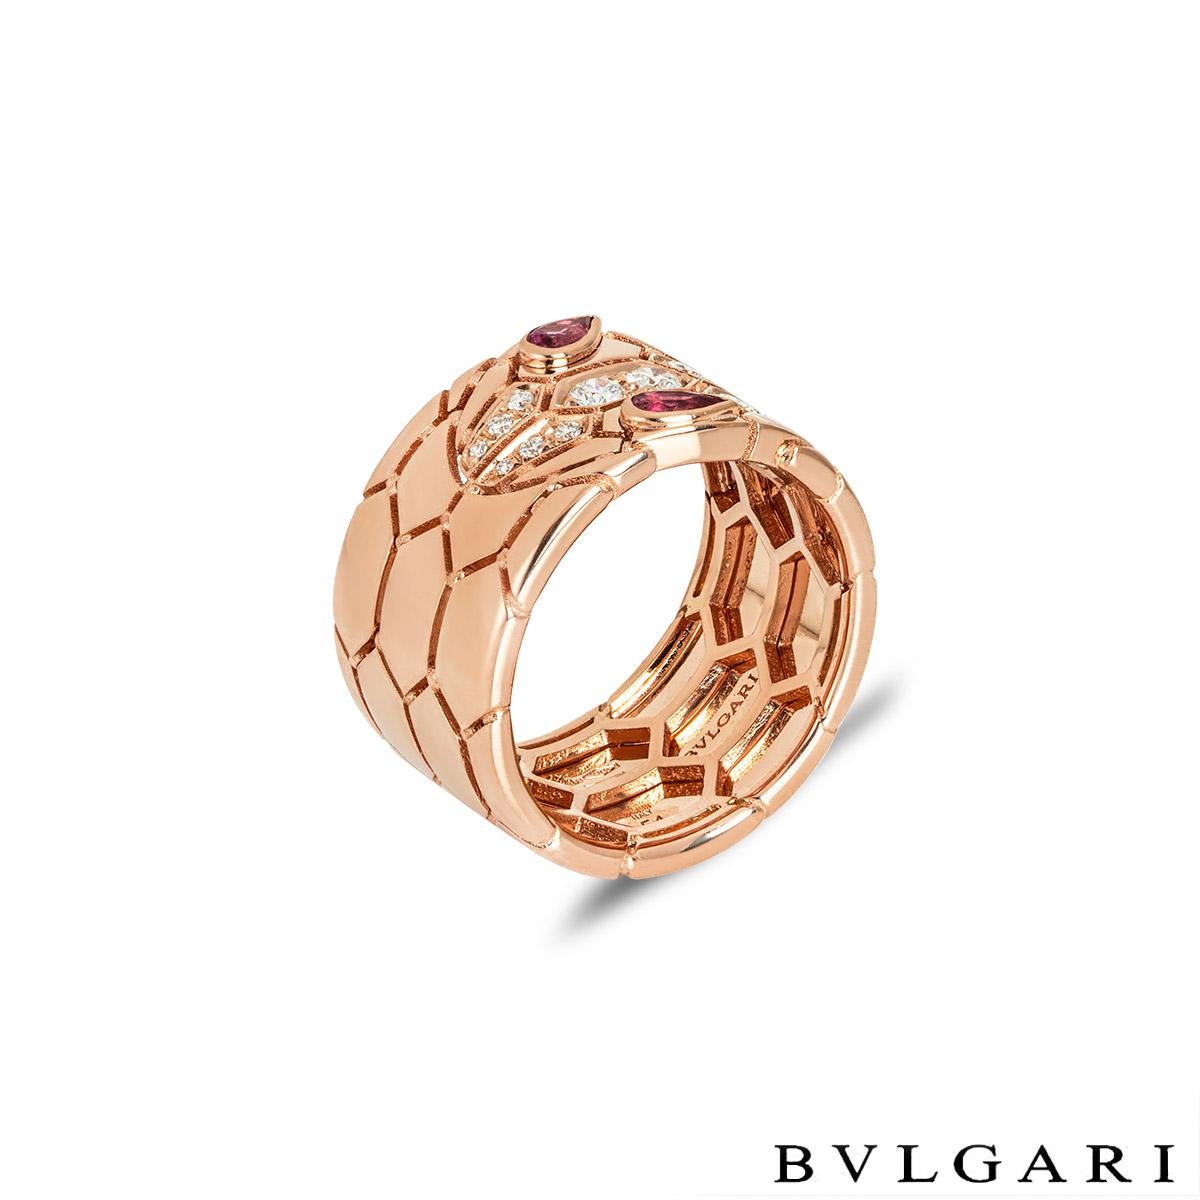 An entrancing 18k rose gold diamond and rubellite ring by Bvlgari from the Serpenti Seduttori collection. The ring is composed of a snake design throughout with a diamond set head and rubellite eyes. The 12 round brilliant cut diamonds have an